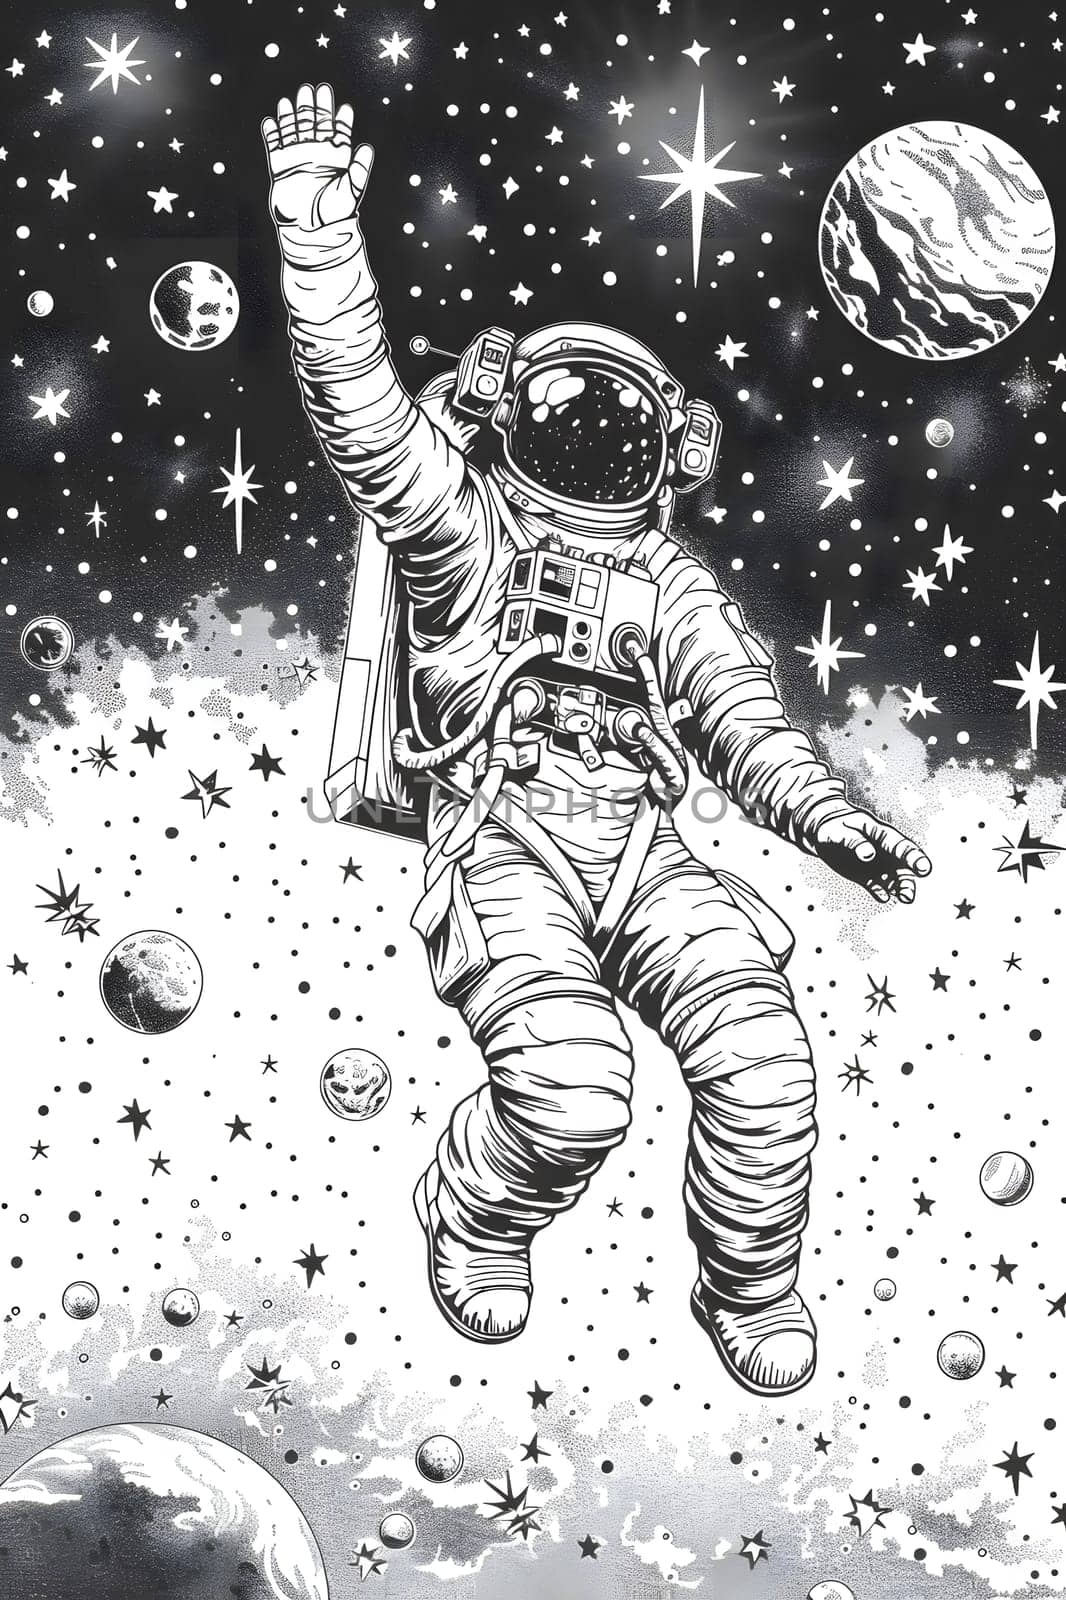 A monochromatic illustration of an astronaut floating in space, surrounded by astronomical objects. The artwork captures the essence of exploration and the beauty of the cosmos